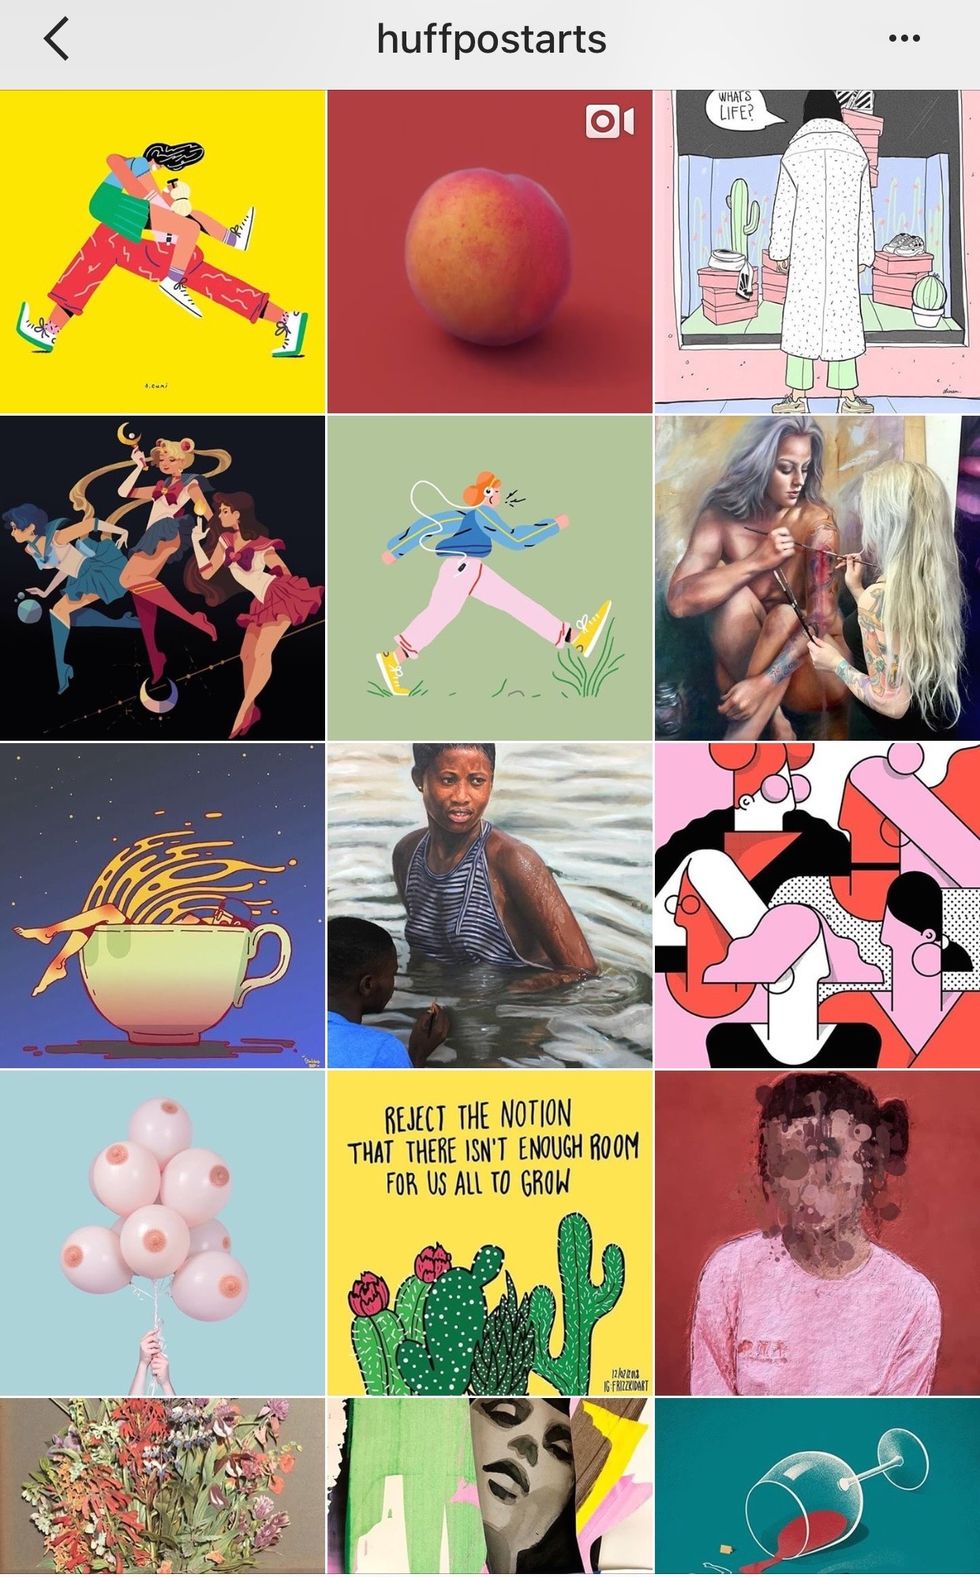 5 Best Instagrams To Follow If You Want To Add Some Art To Your Feed